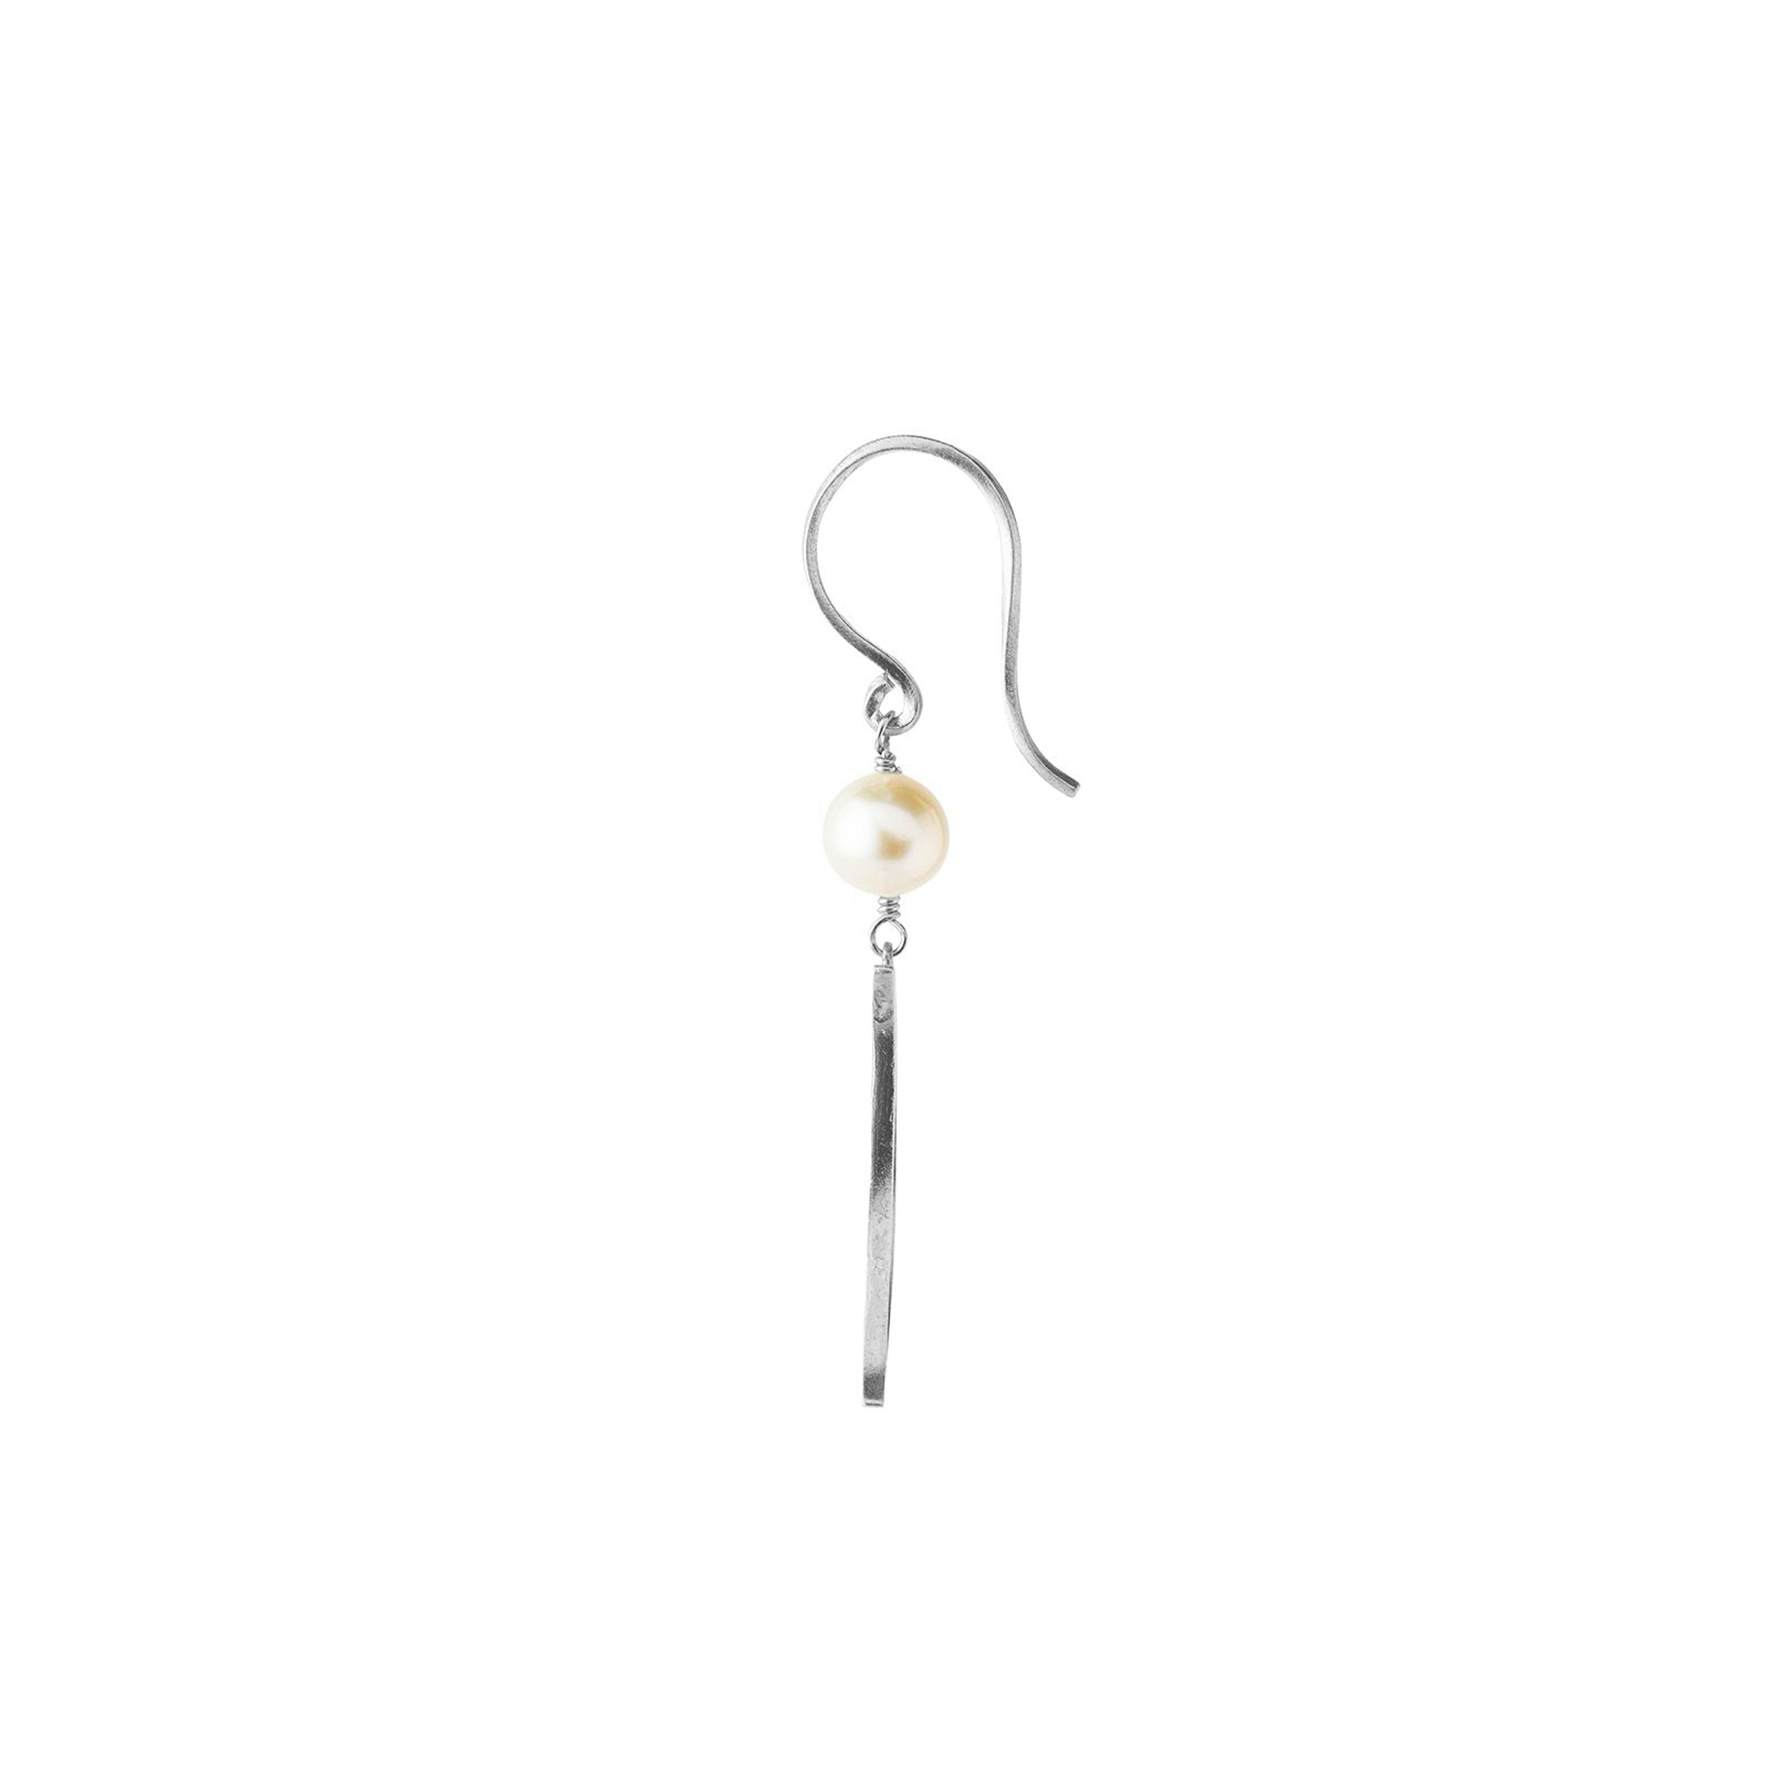 Bella Moon Earring With Pearl fra STINE A Jewelry i Sølv Sterling 925